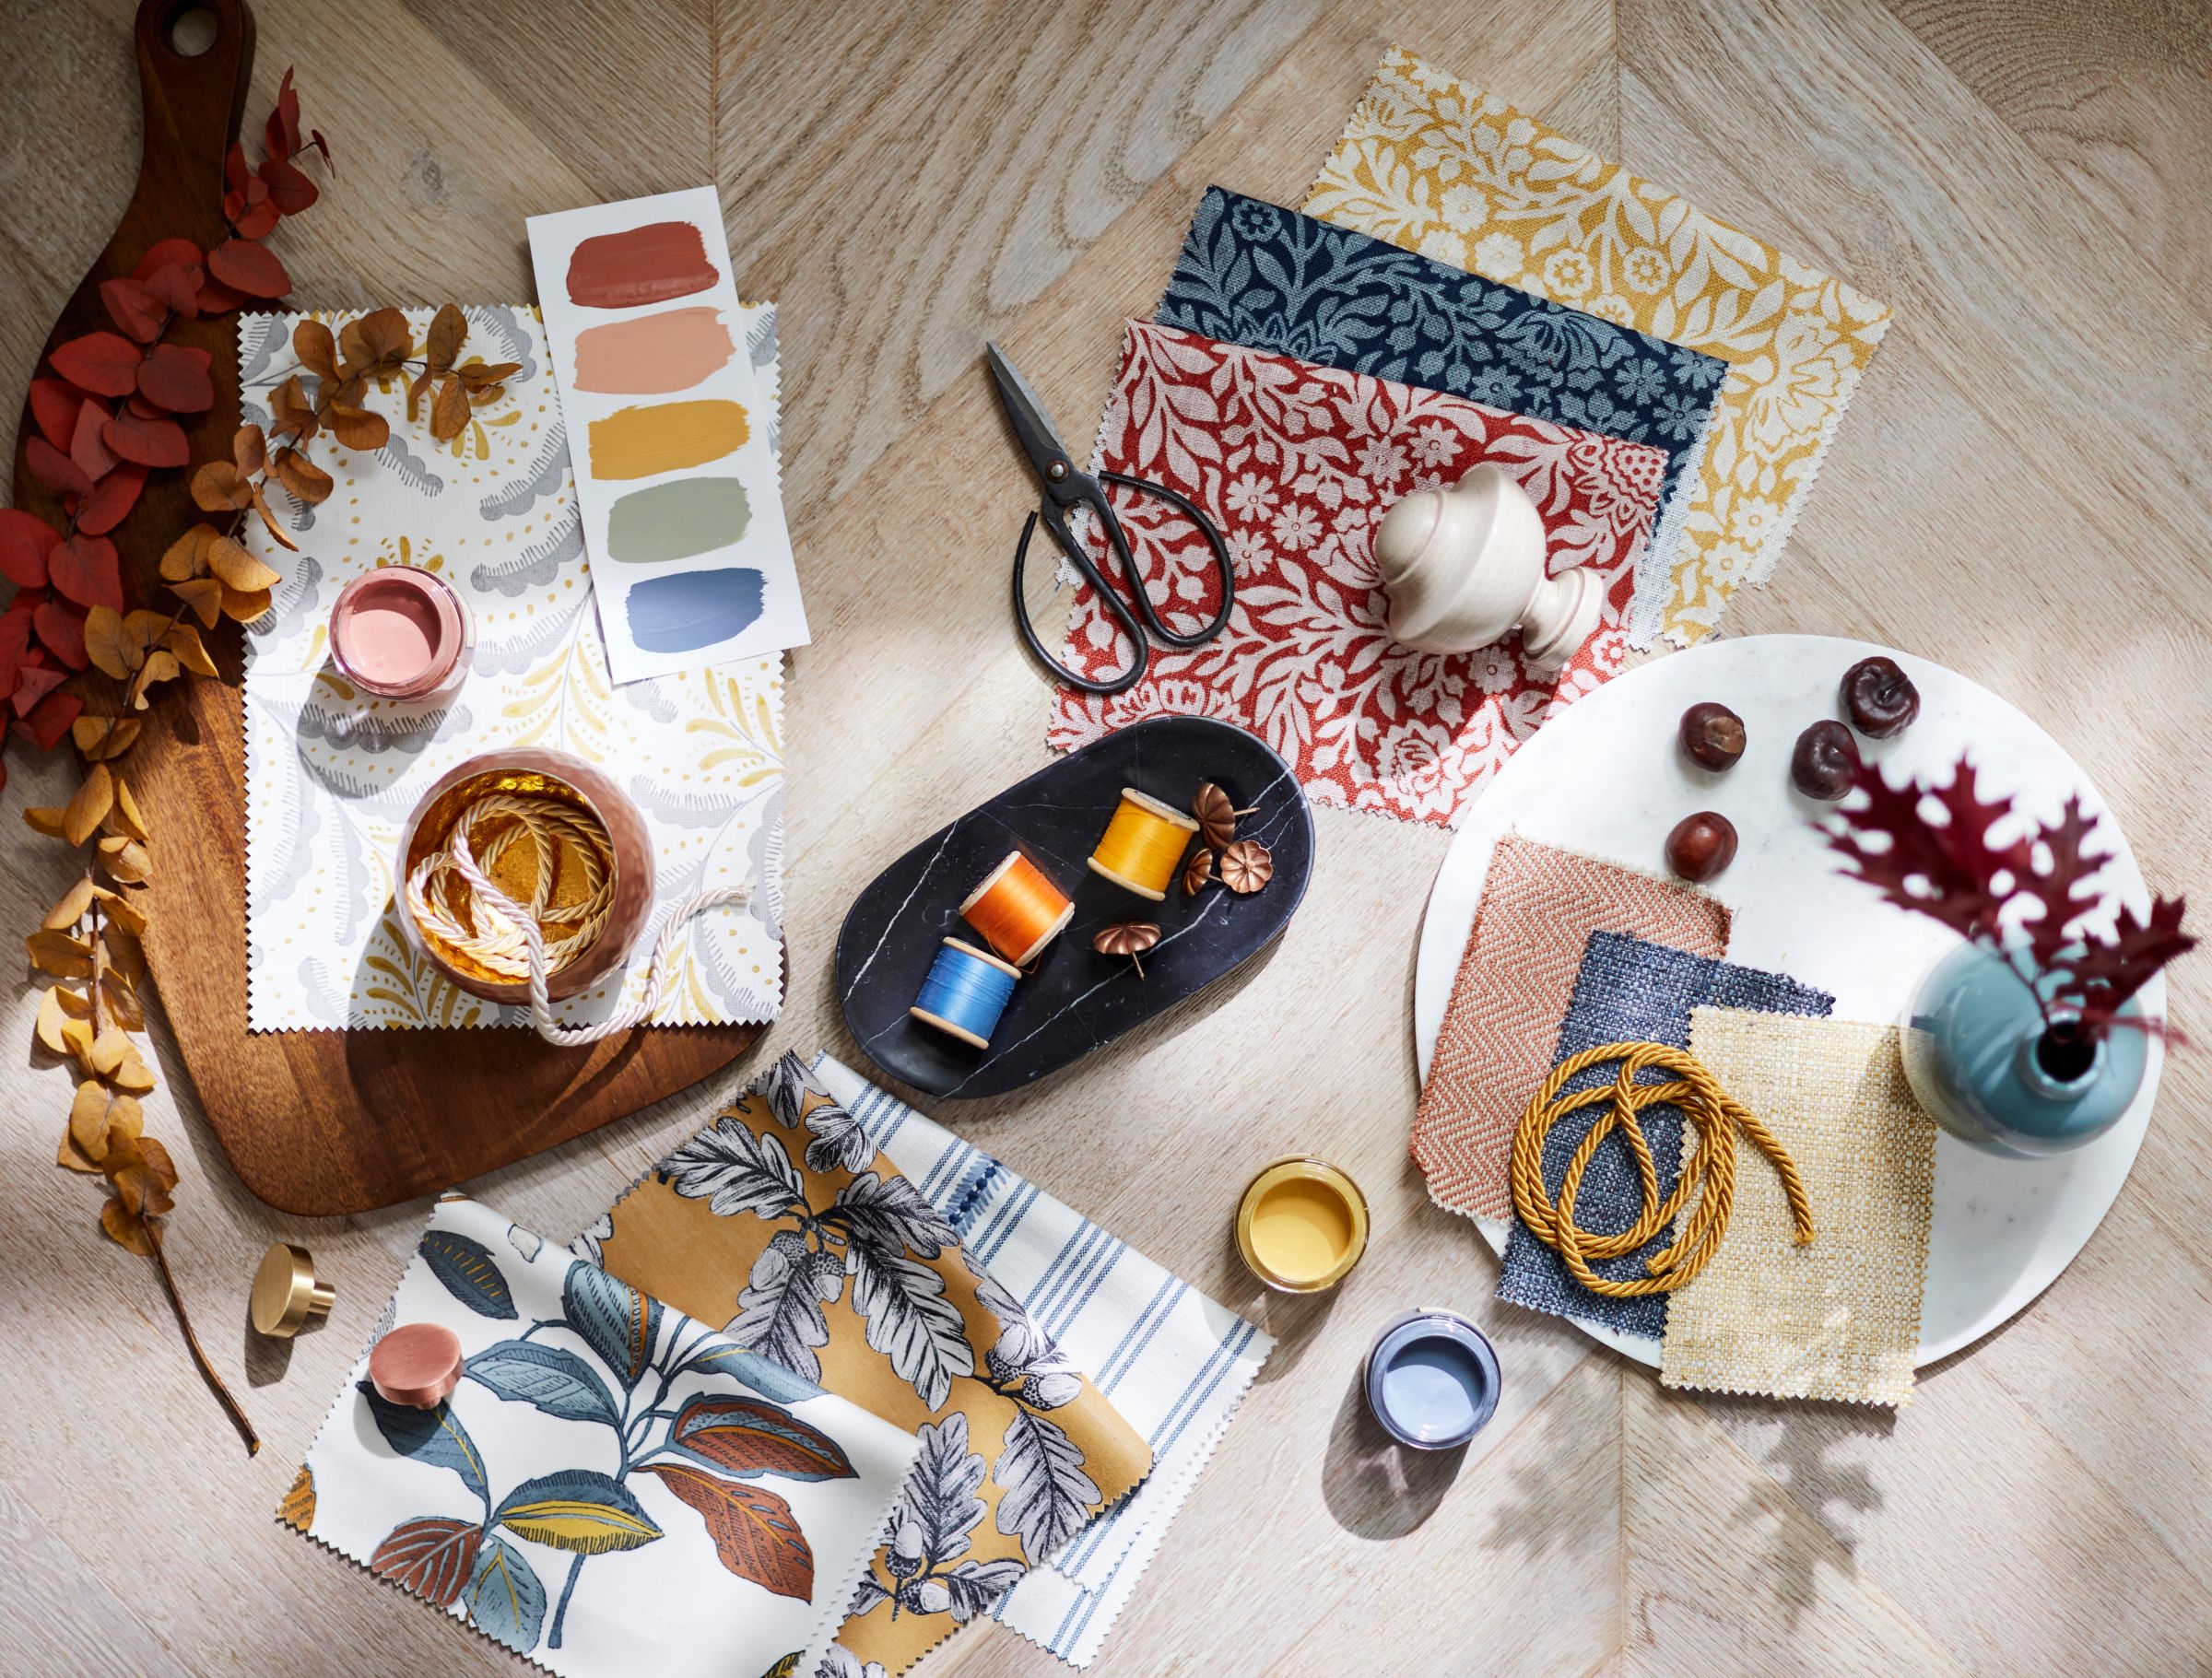 Plan your next decorating project with a modern approach to moodboards